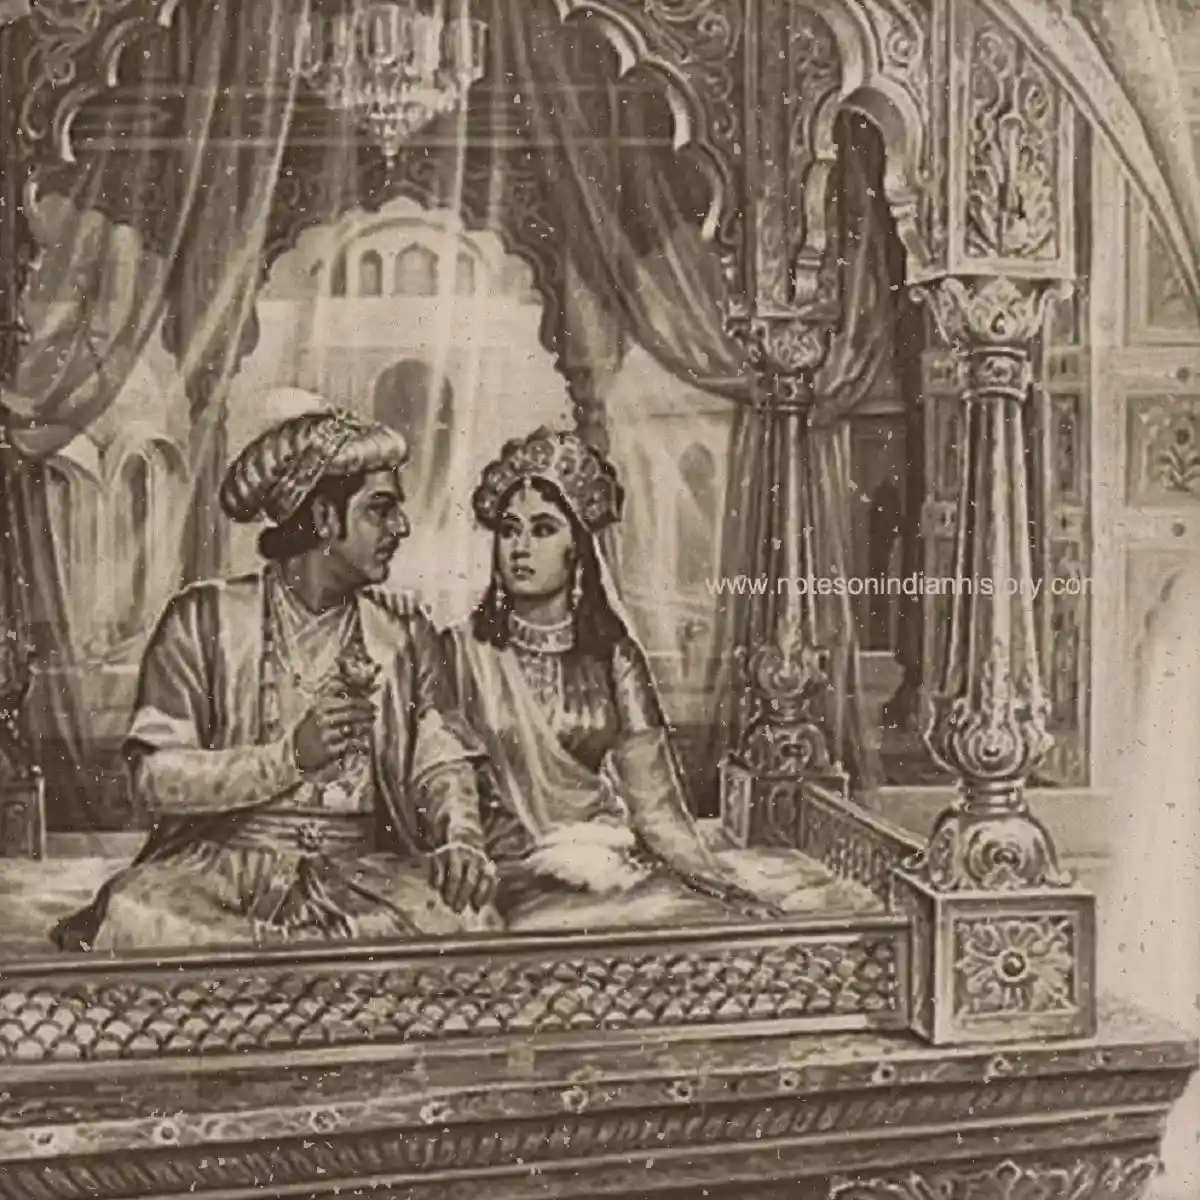 Nur Jahan and Jahangir’s royal romance; Image source- Notes on Indian History